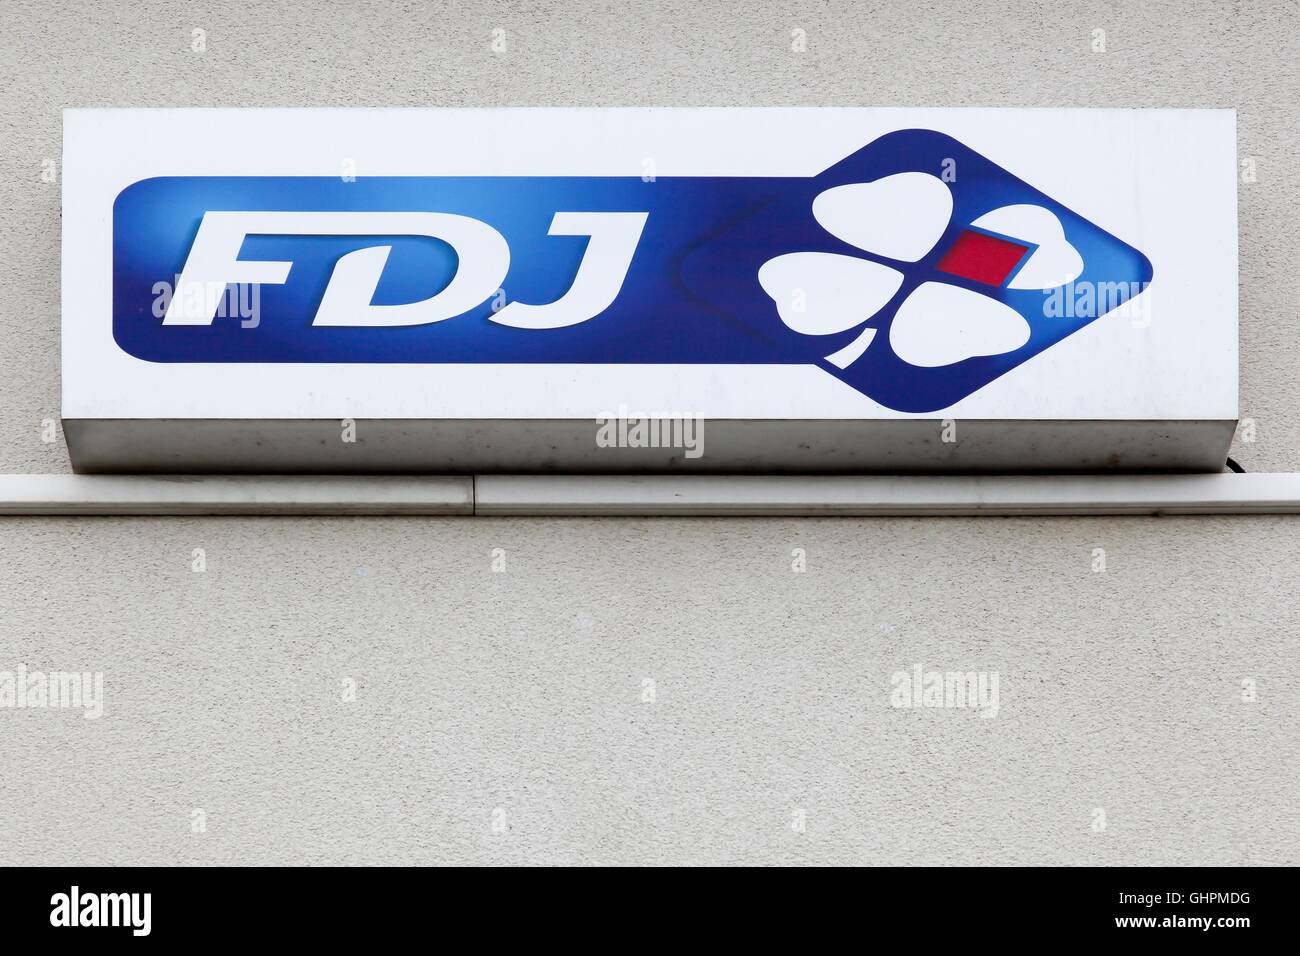 Francaise des Jeux also called FDJ logo on wall Stock Photo